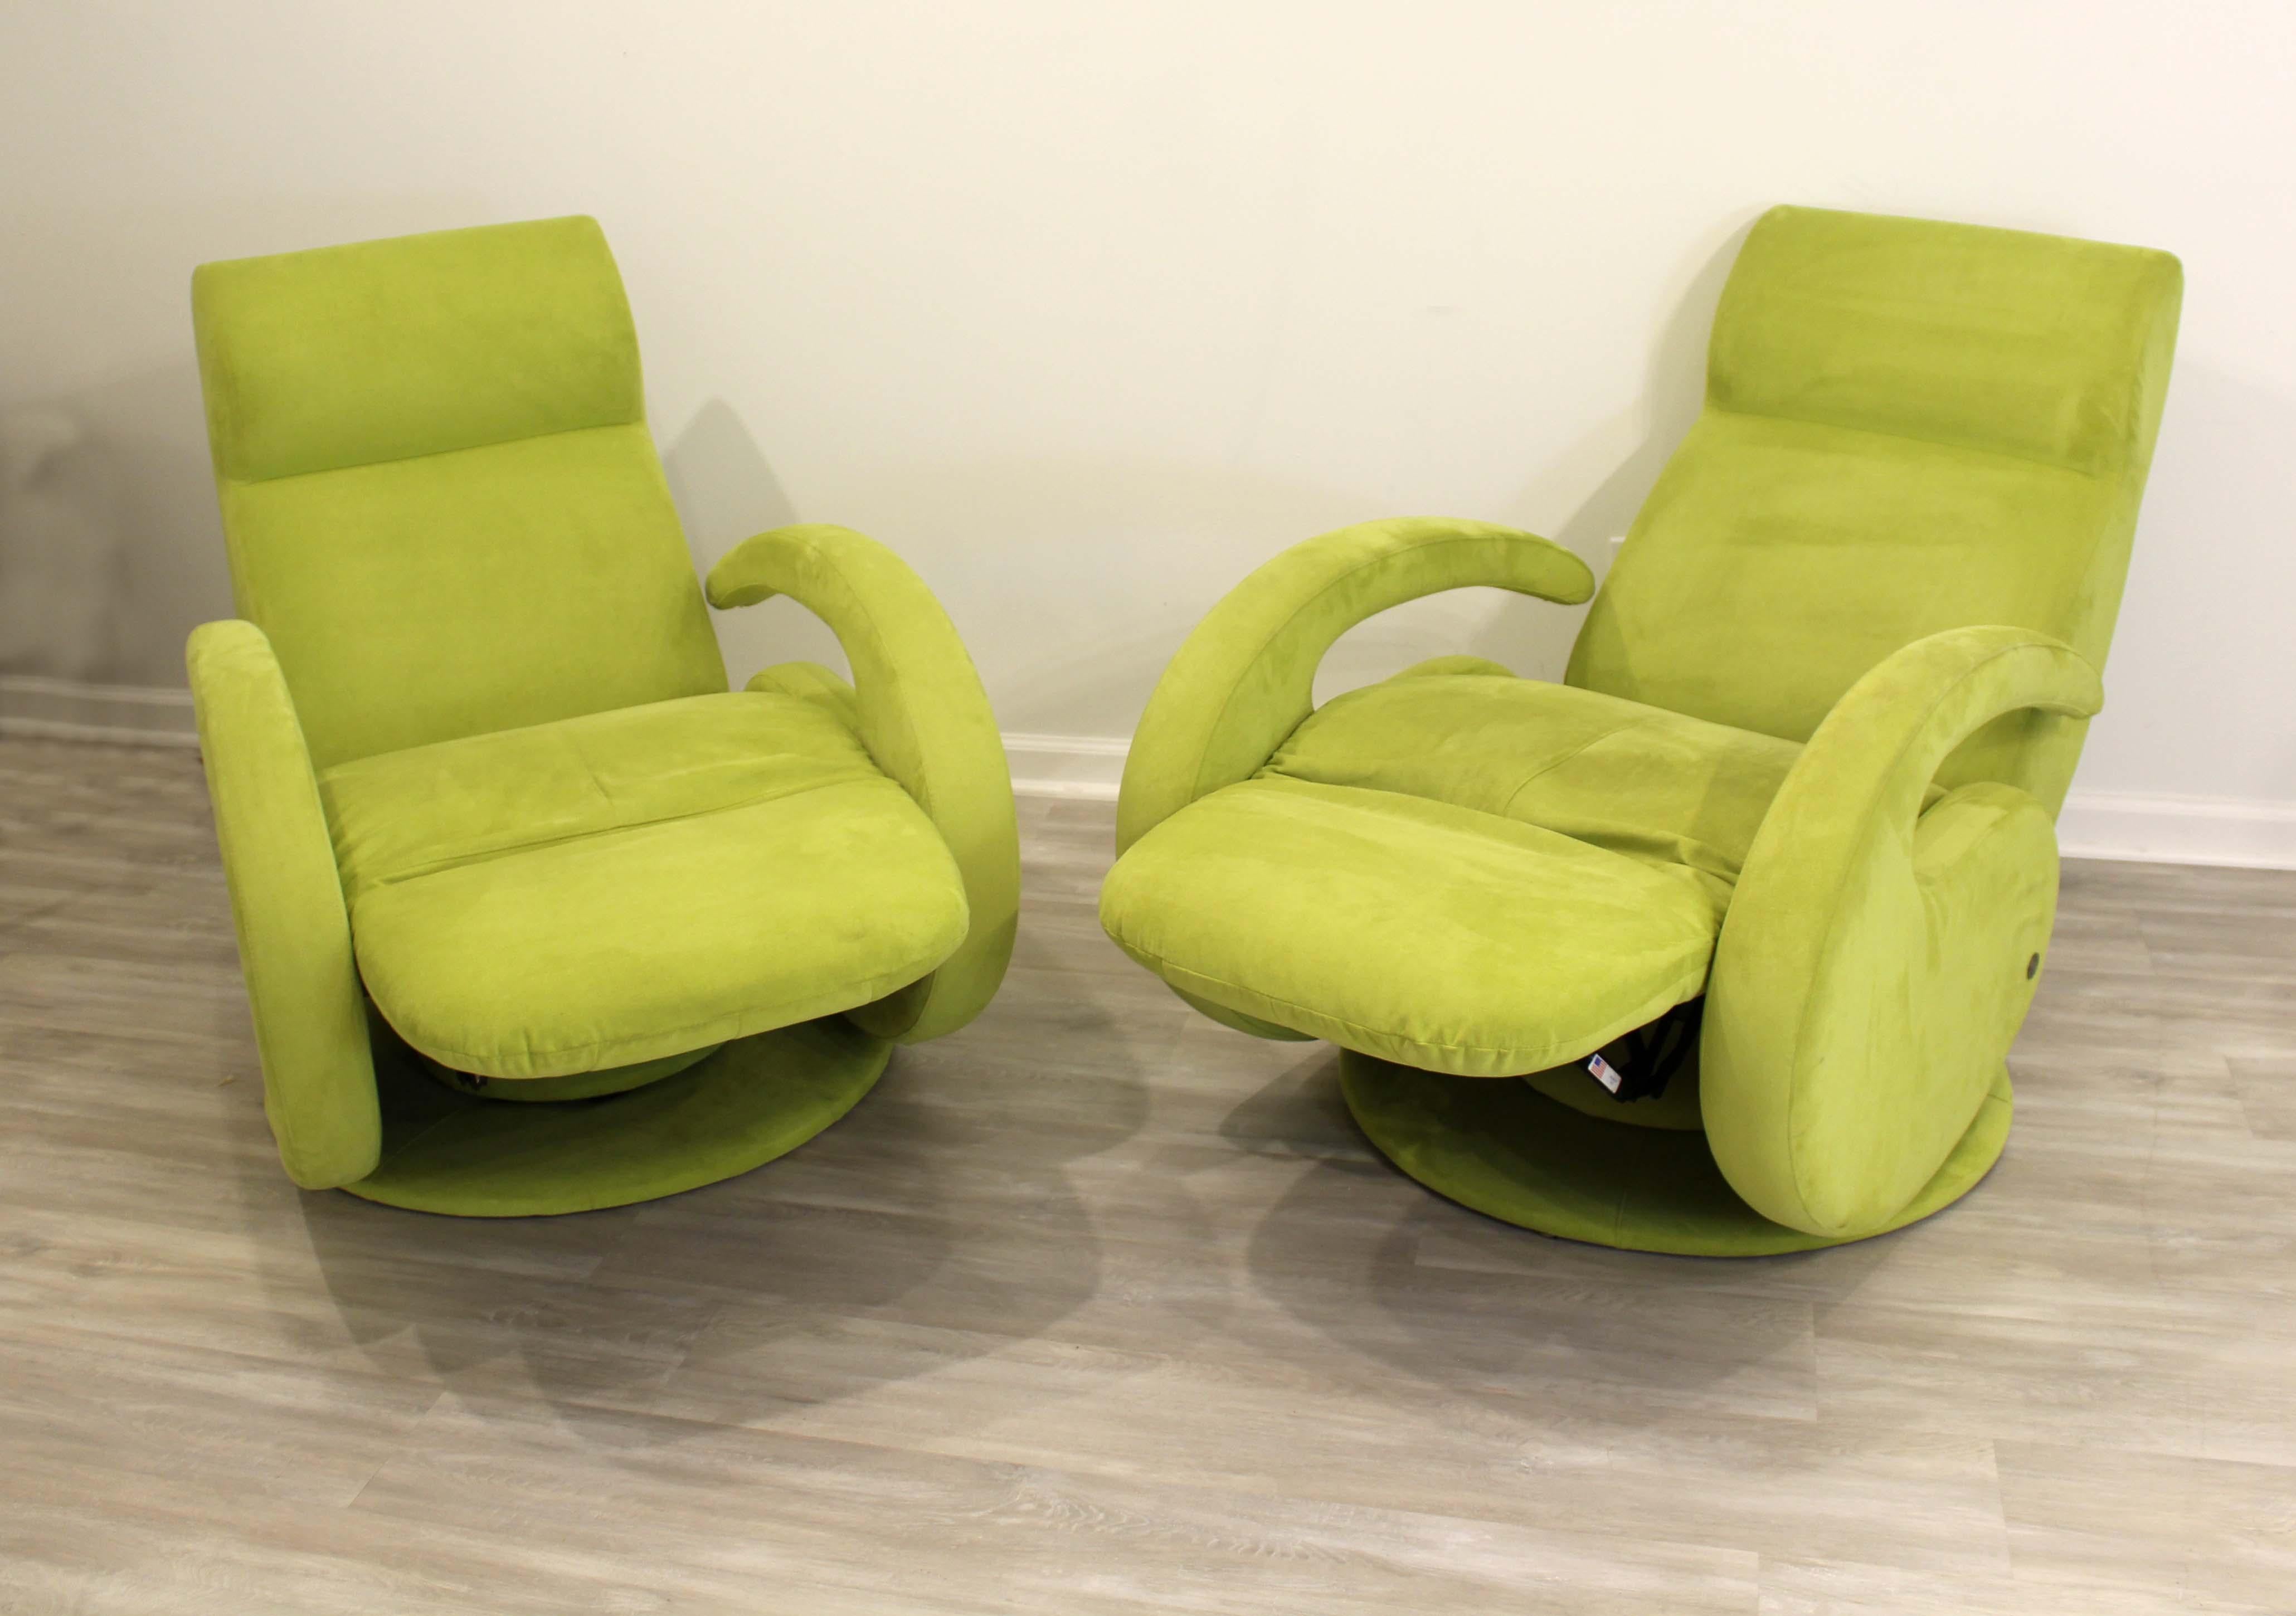 Pair of American Leather Ultra Suede Reclining Swivel Arm Chairs 2